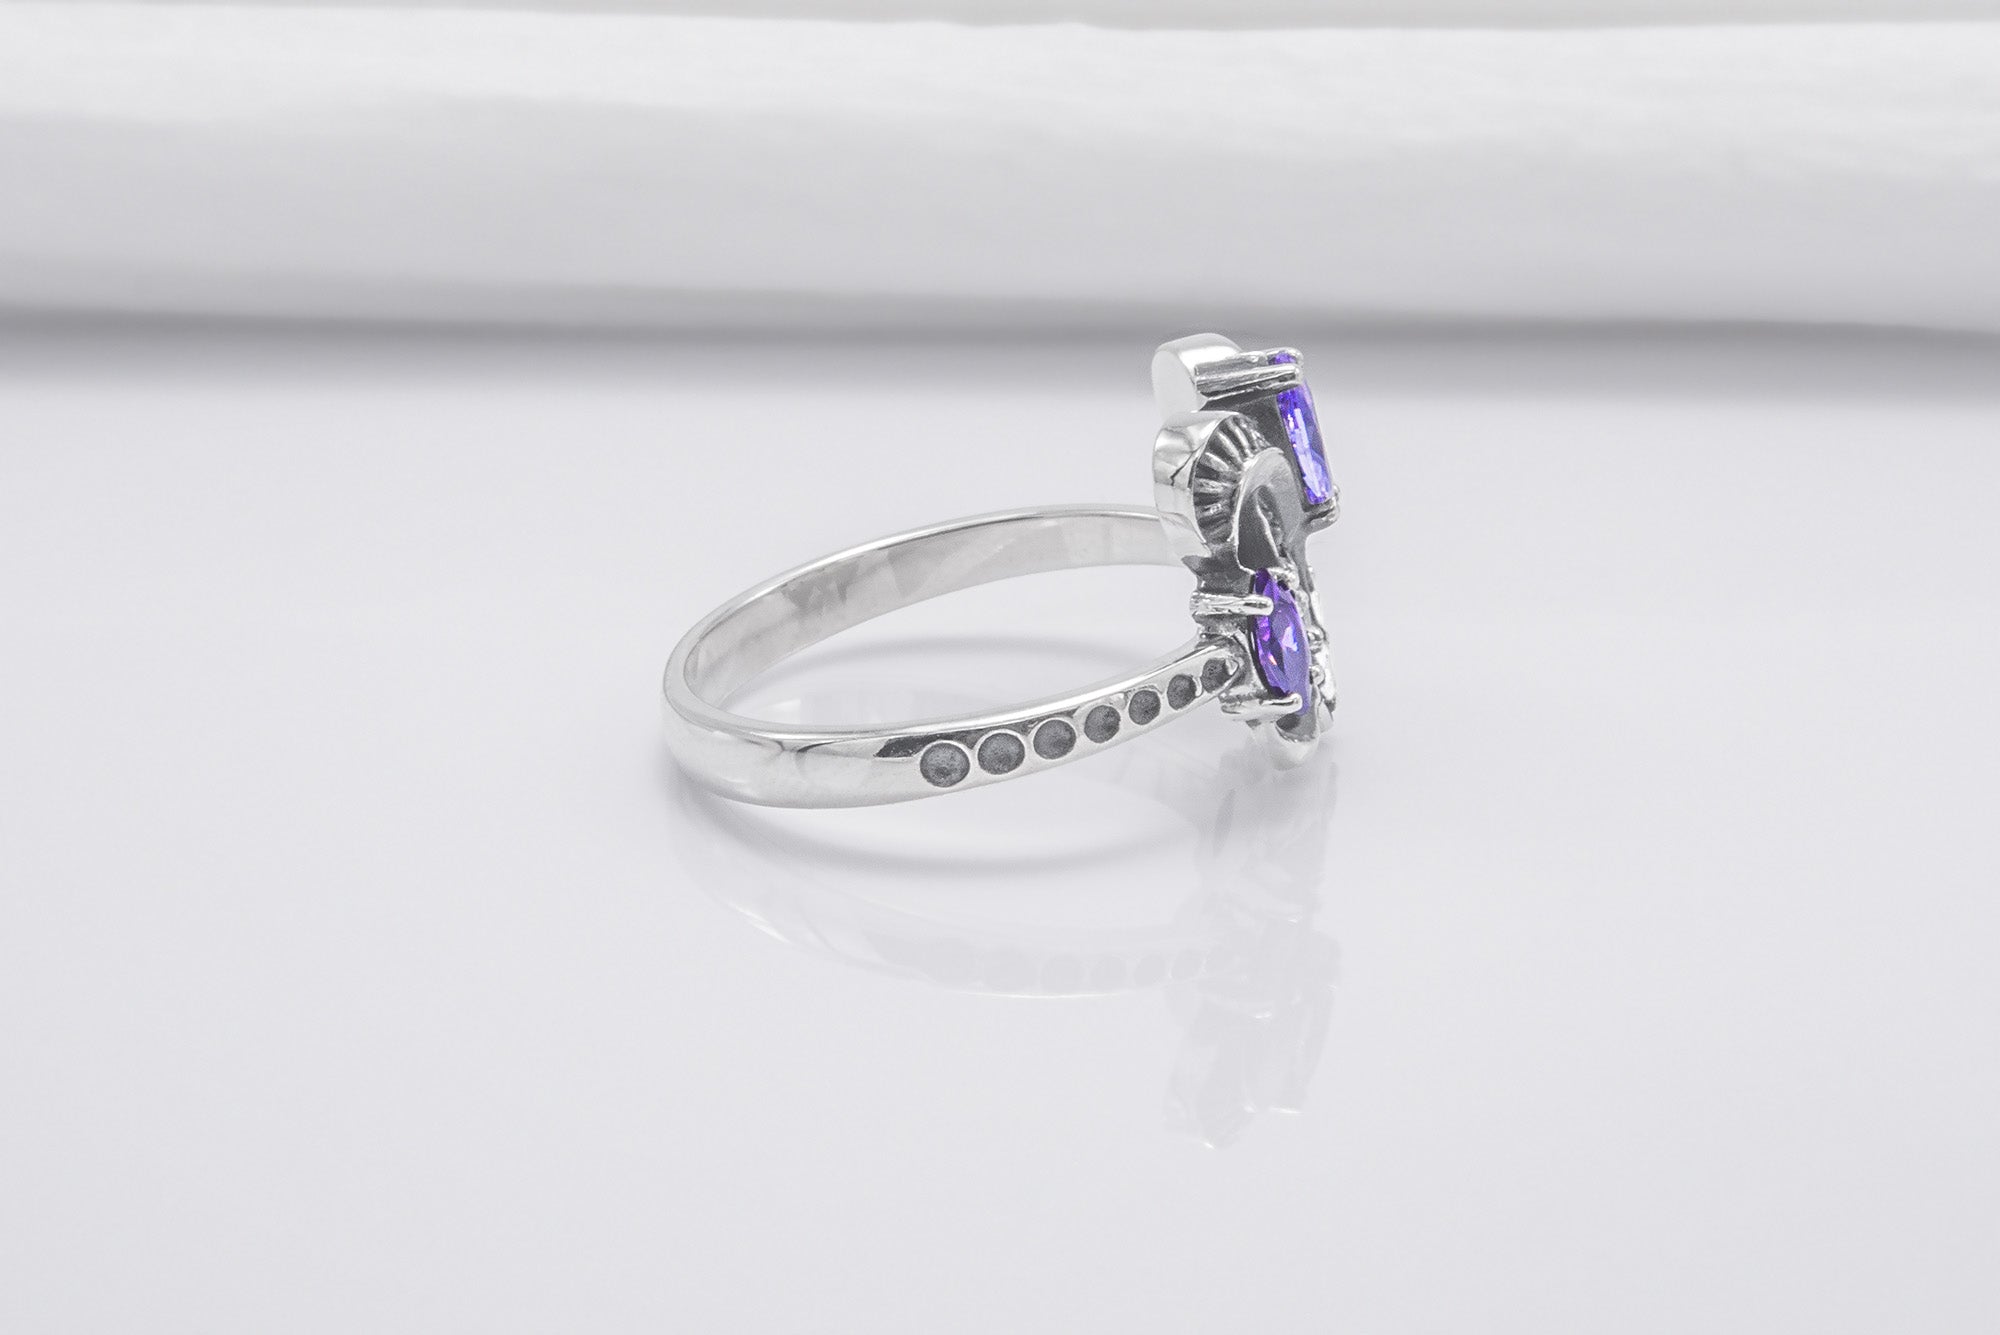 Unique 925 Silver Ring With Purple Gems, Handcrafted Jewelry - vikingworkshop